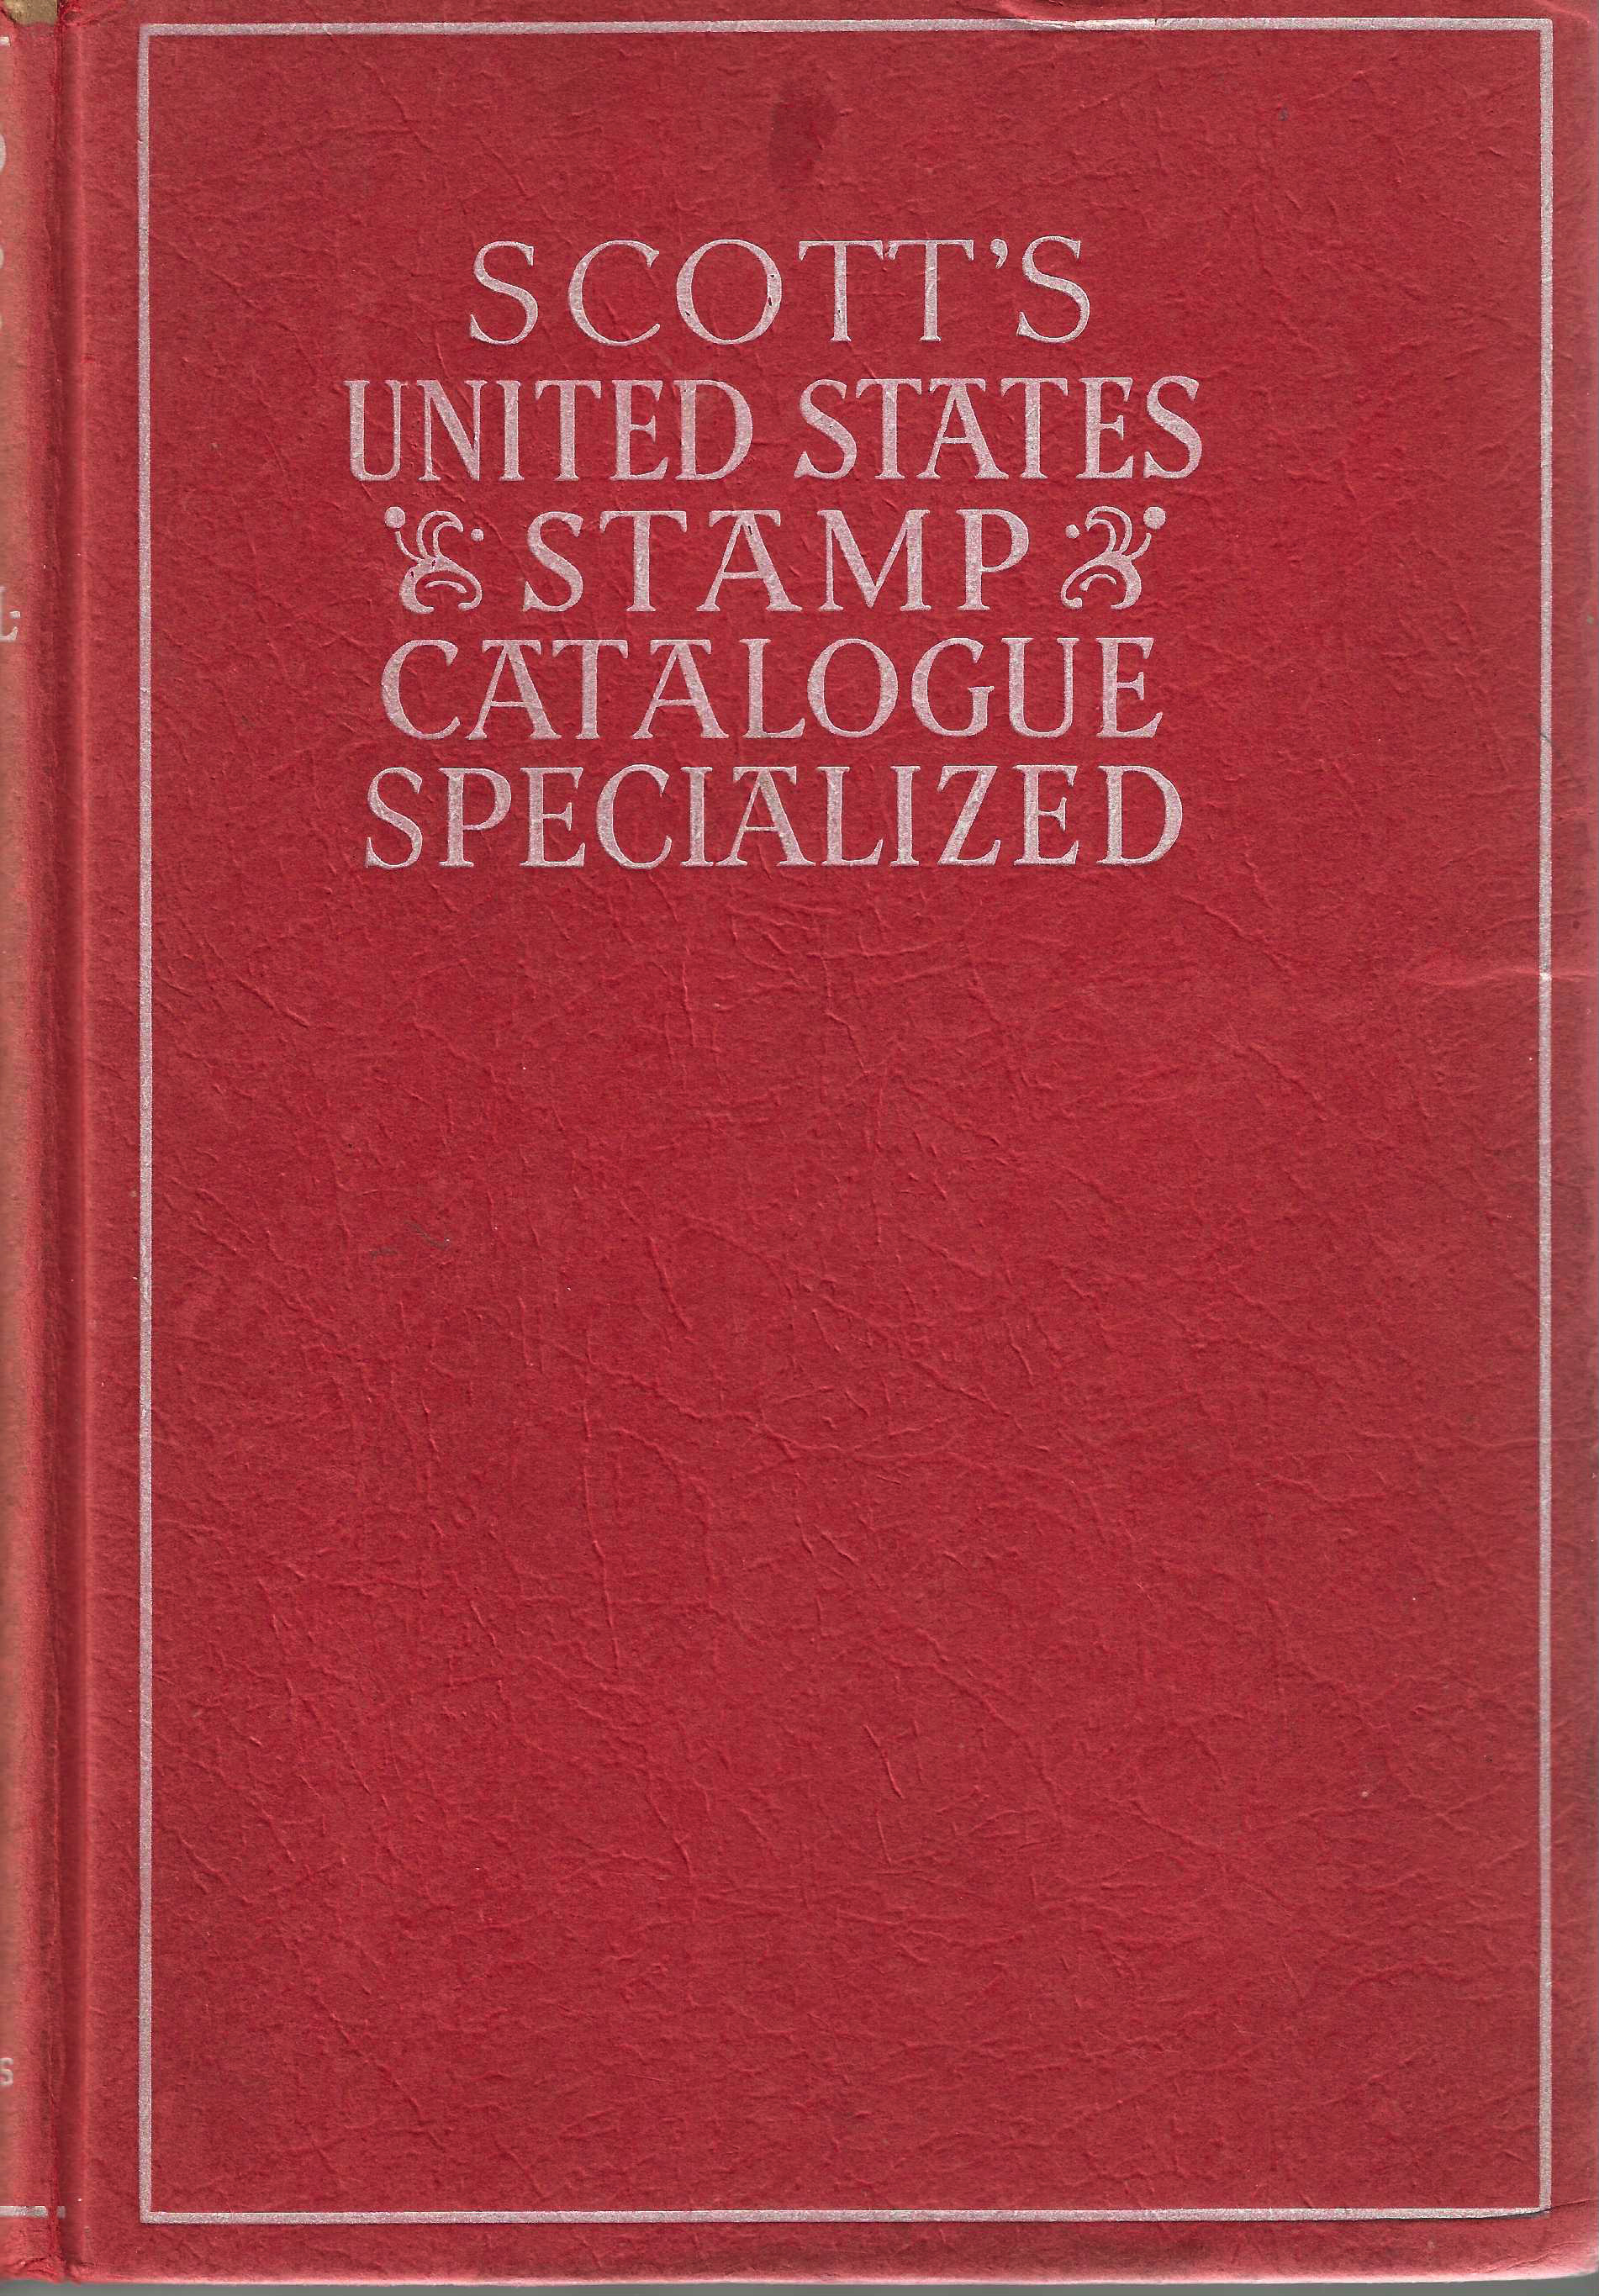 CATALOG - Scott Publications 1950 United States Specialized Stamp Catalog, fine used condition